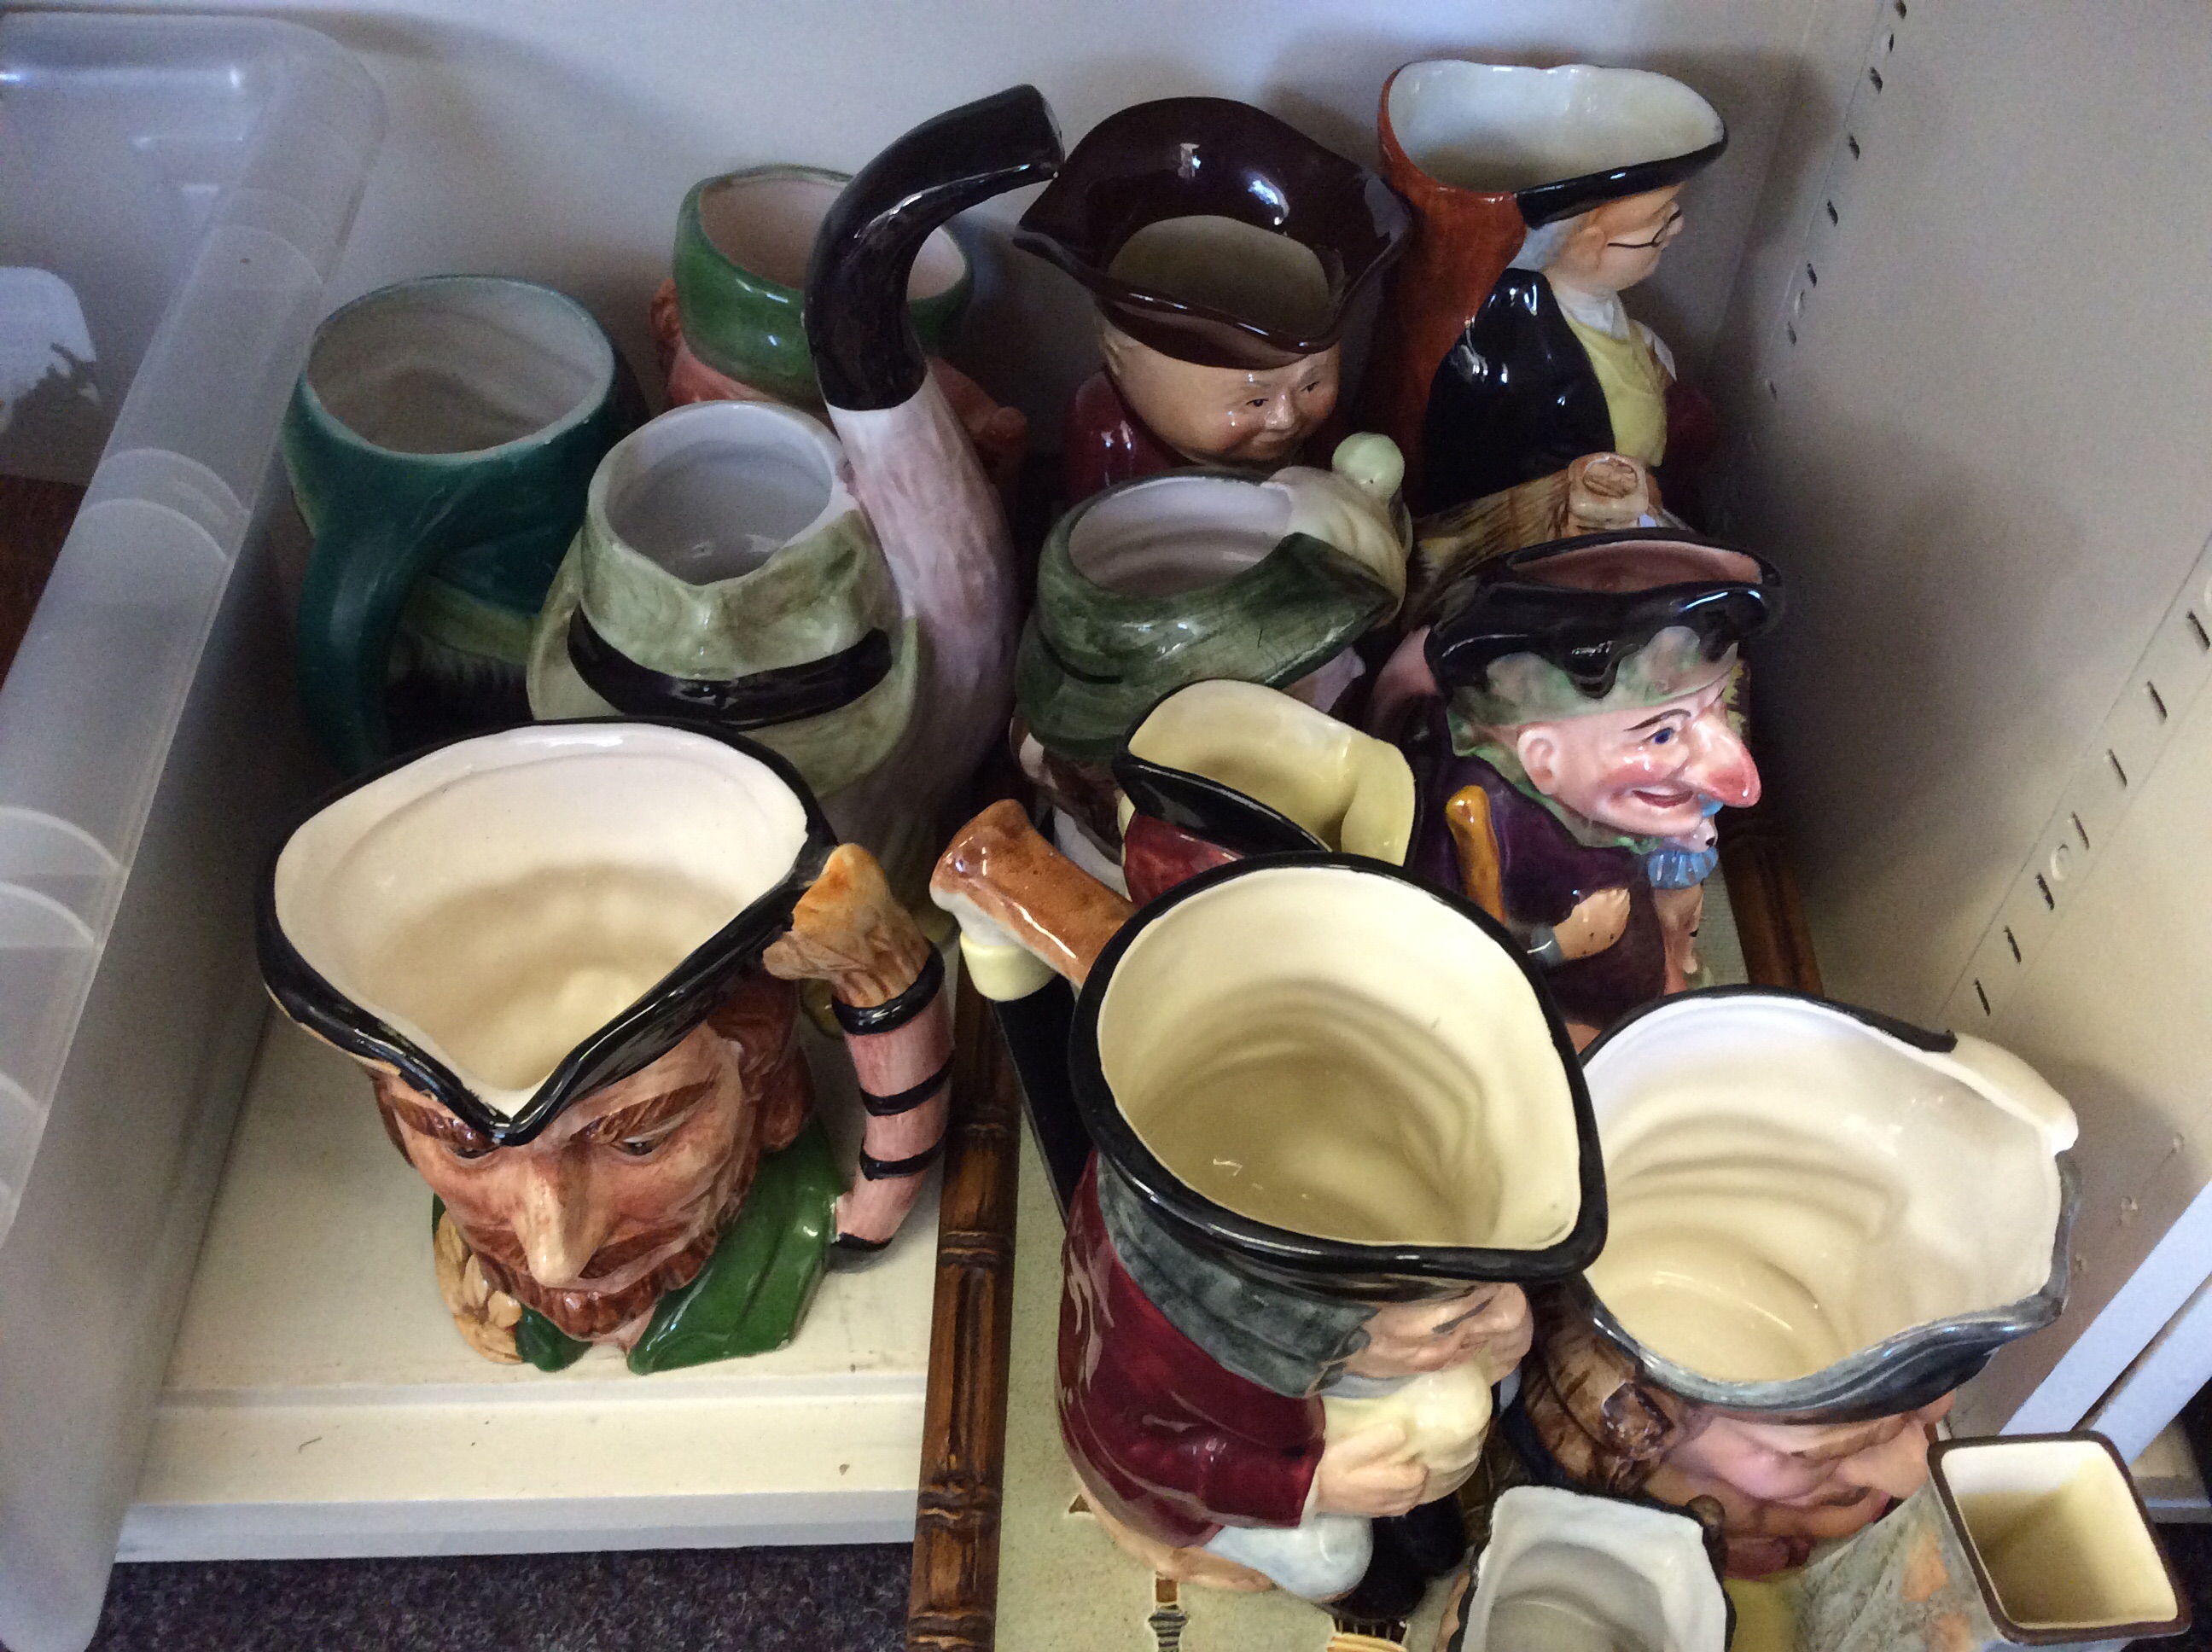 Lot to include a set of 13 Toby jugs and china